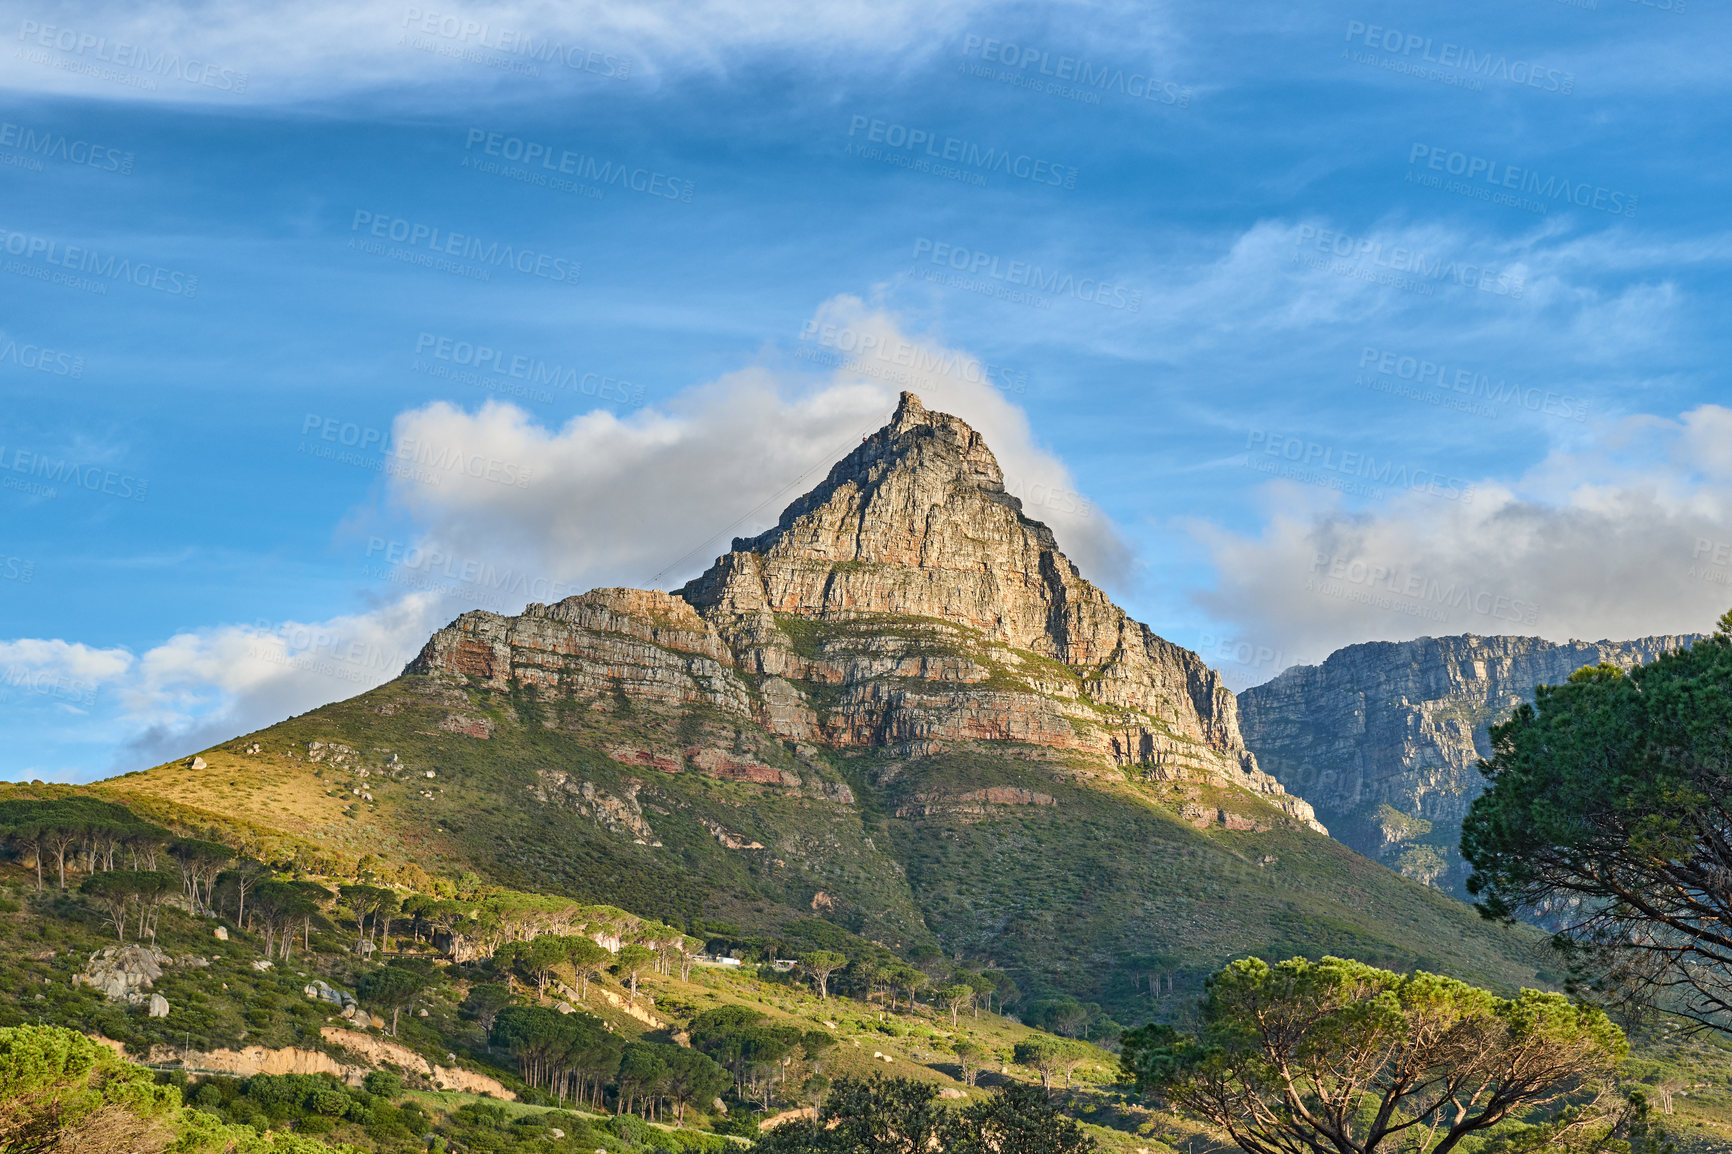 Buy stock photo Copyspace landscape view of mountain with lush trees and plants. Beautiful scenic popular natural landmark and tourist attraction for hiking and adventure on Table Mountain in Cape Town, South Africa